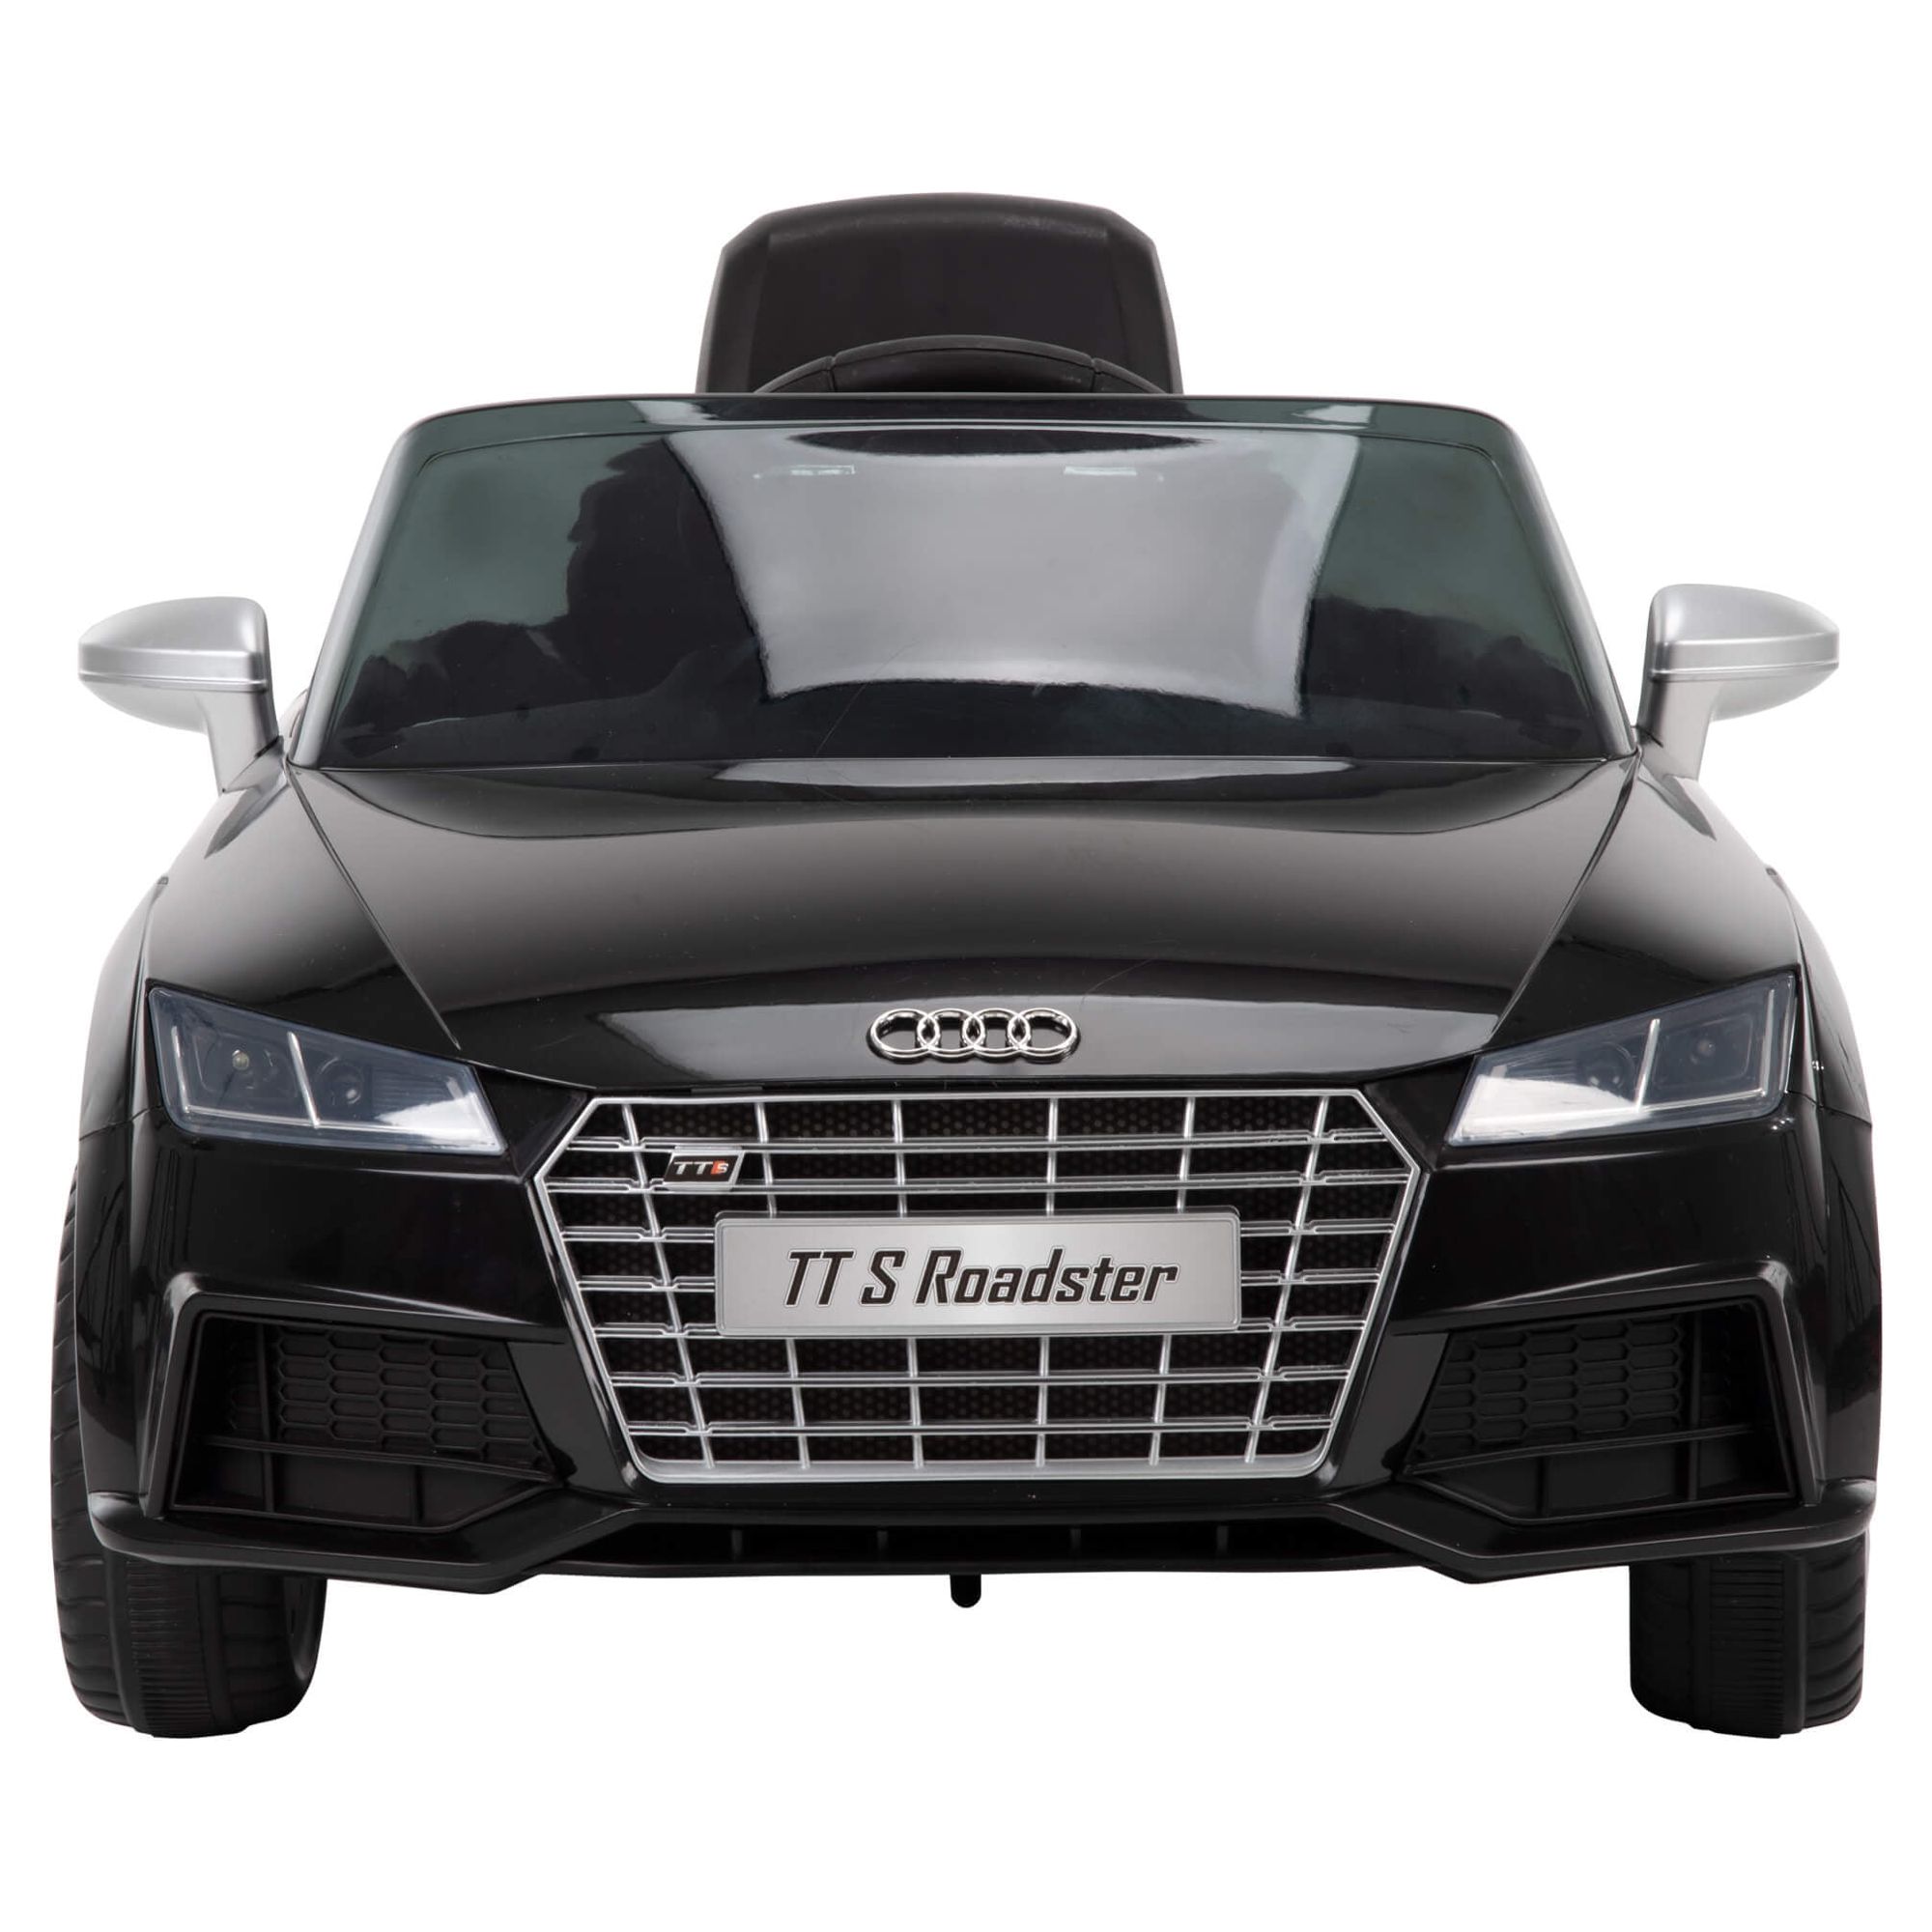 12 Volts Audi Electric Battery-Powered Ride-on Car, for Children ages 3+ Years, Black, by Huffy - image 2 of 6